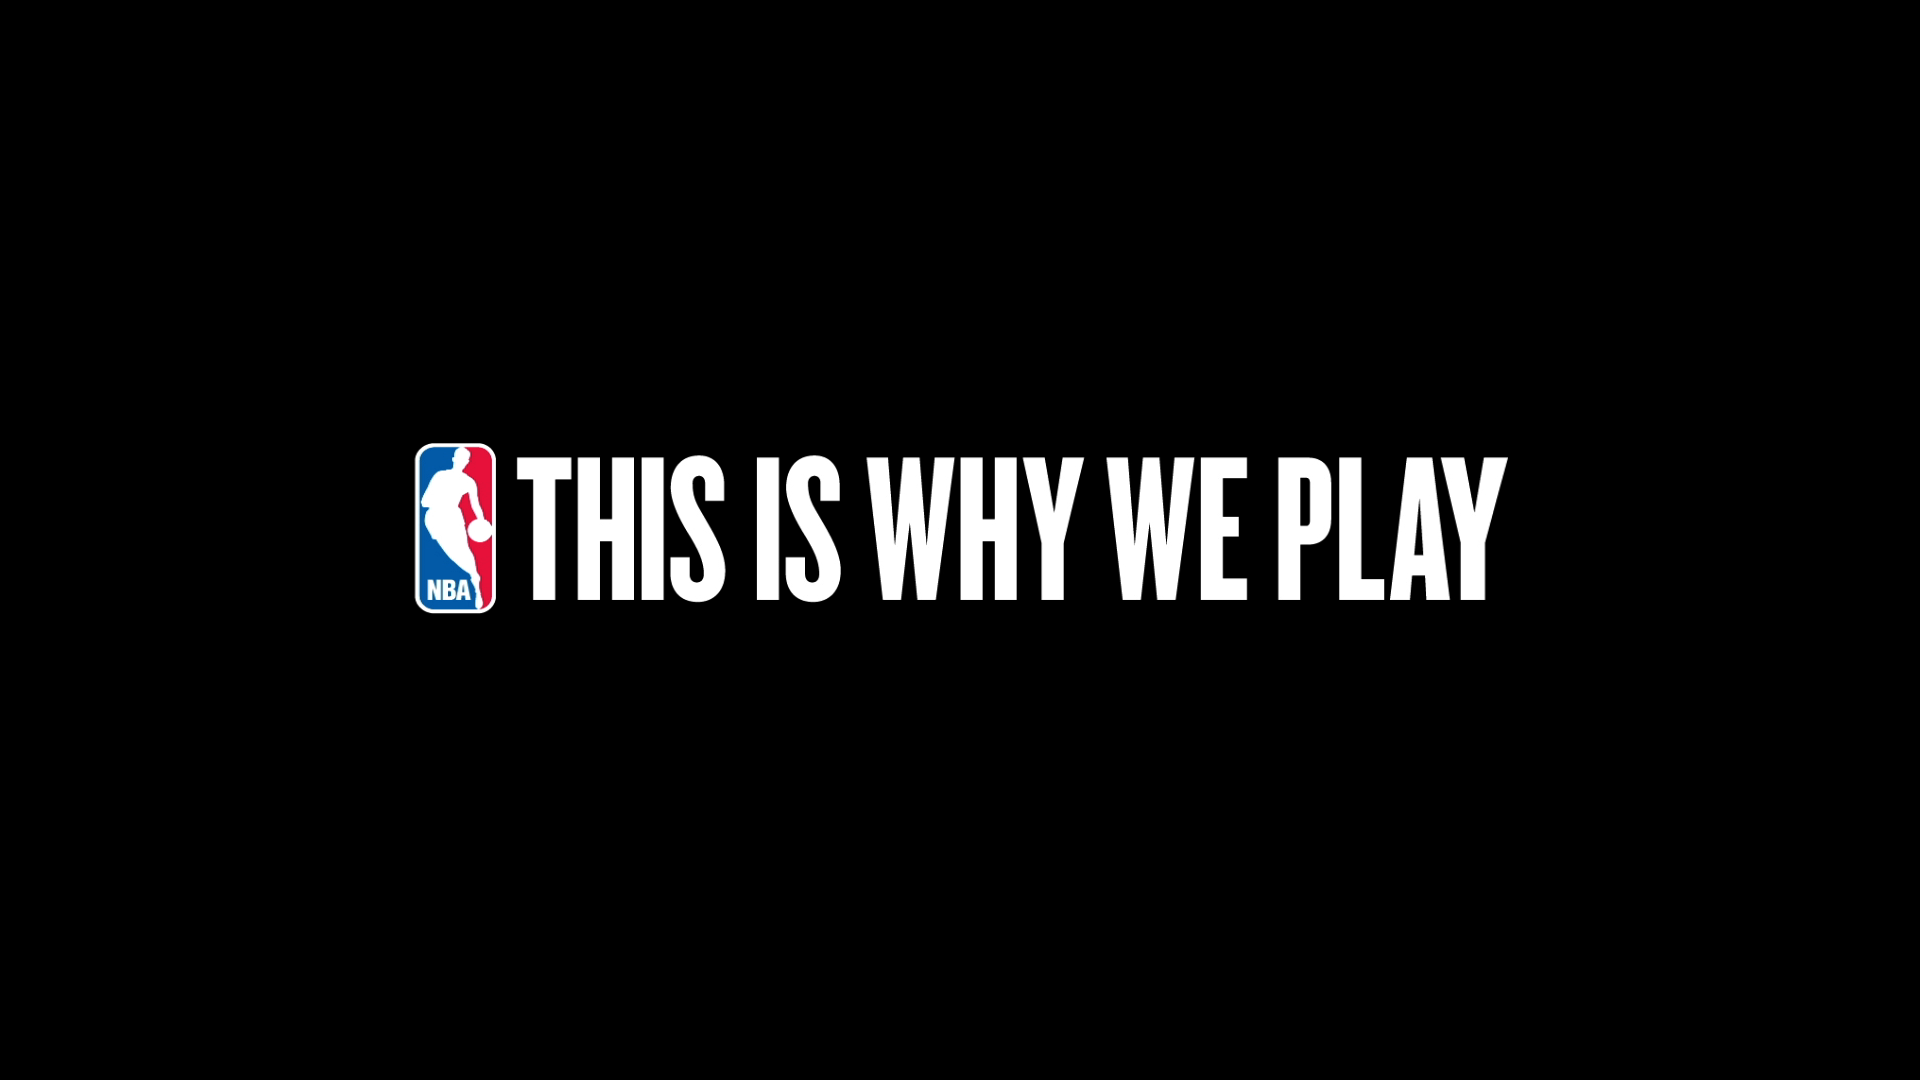 NBA | "This Is Why We Play"